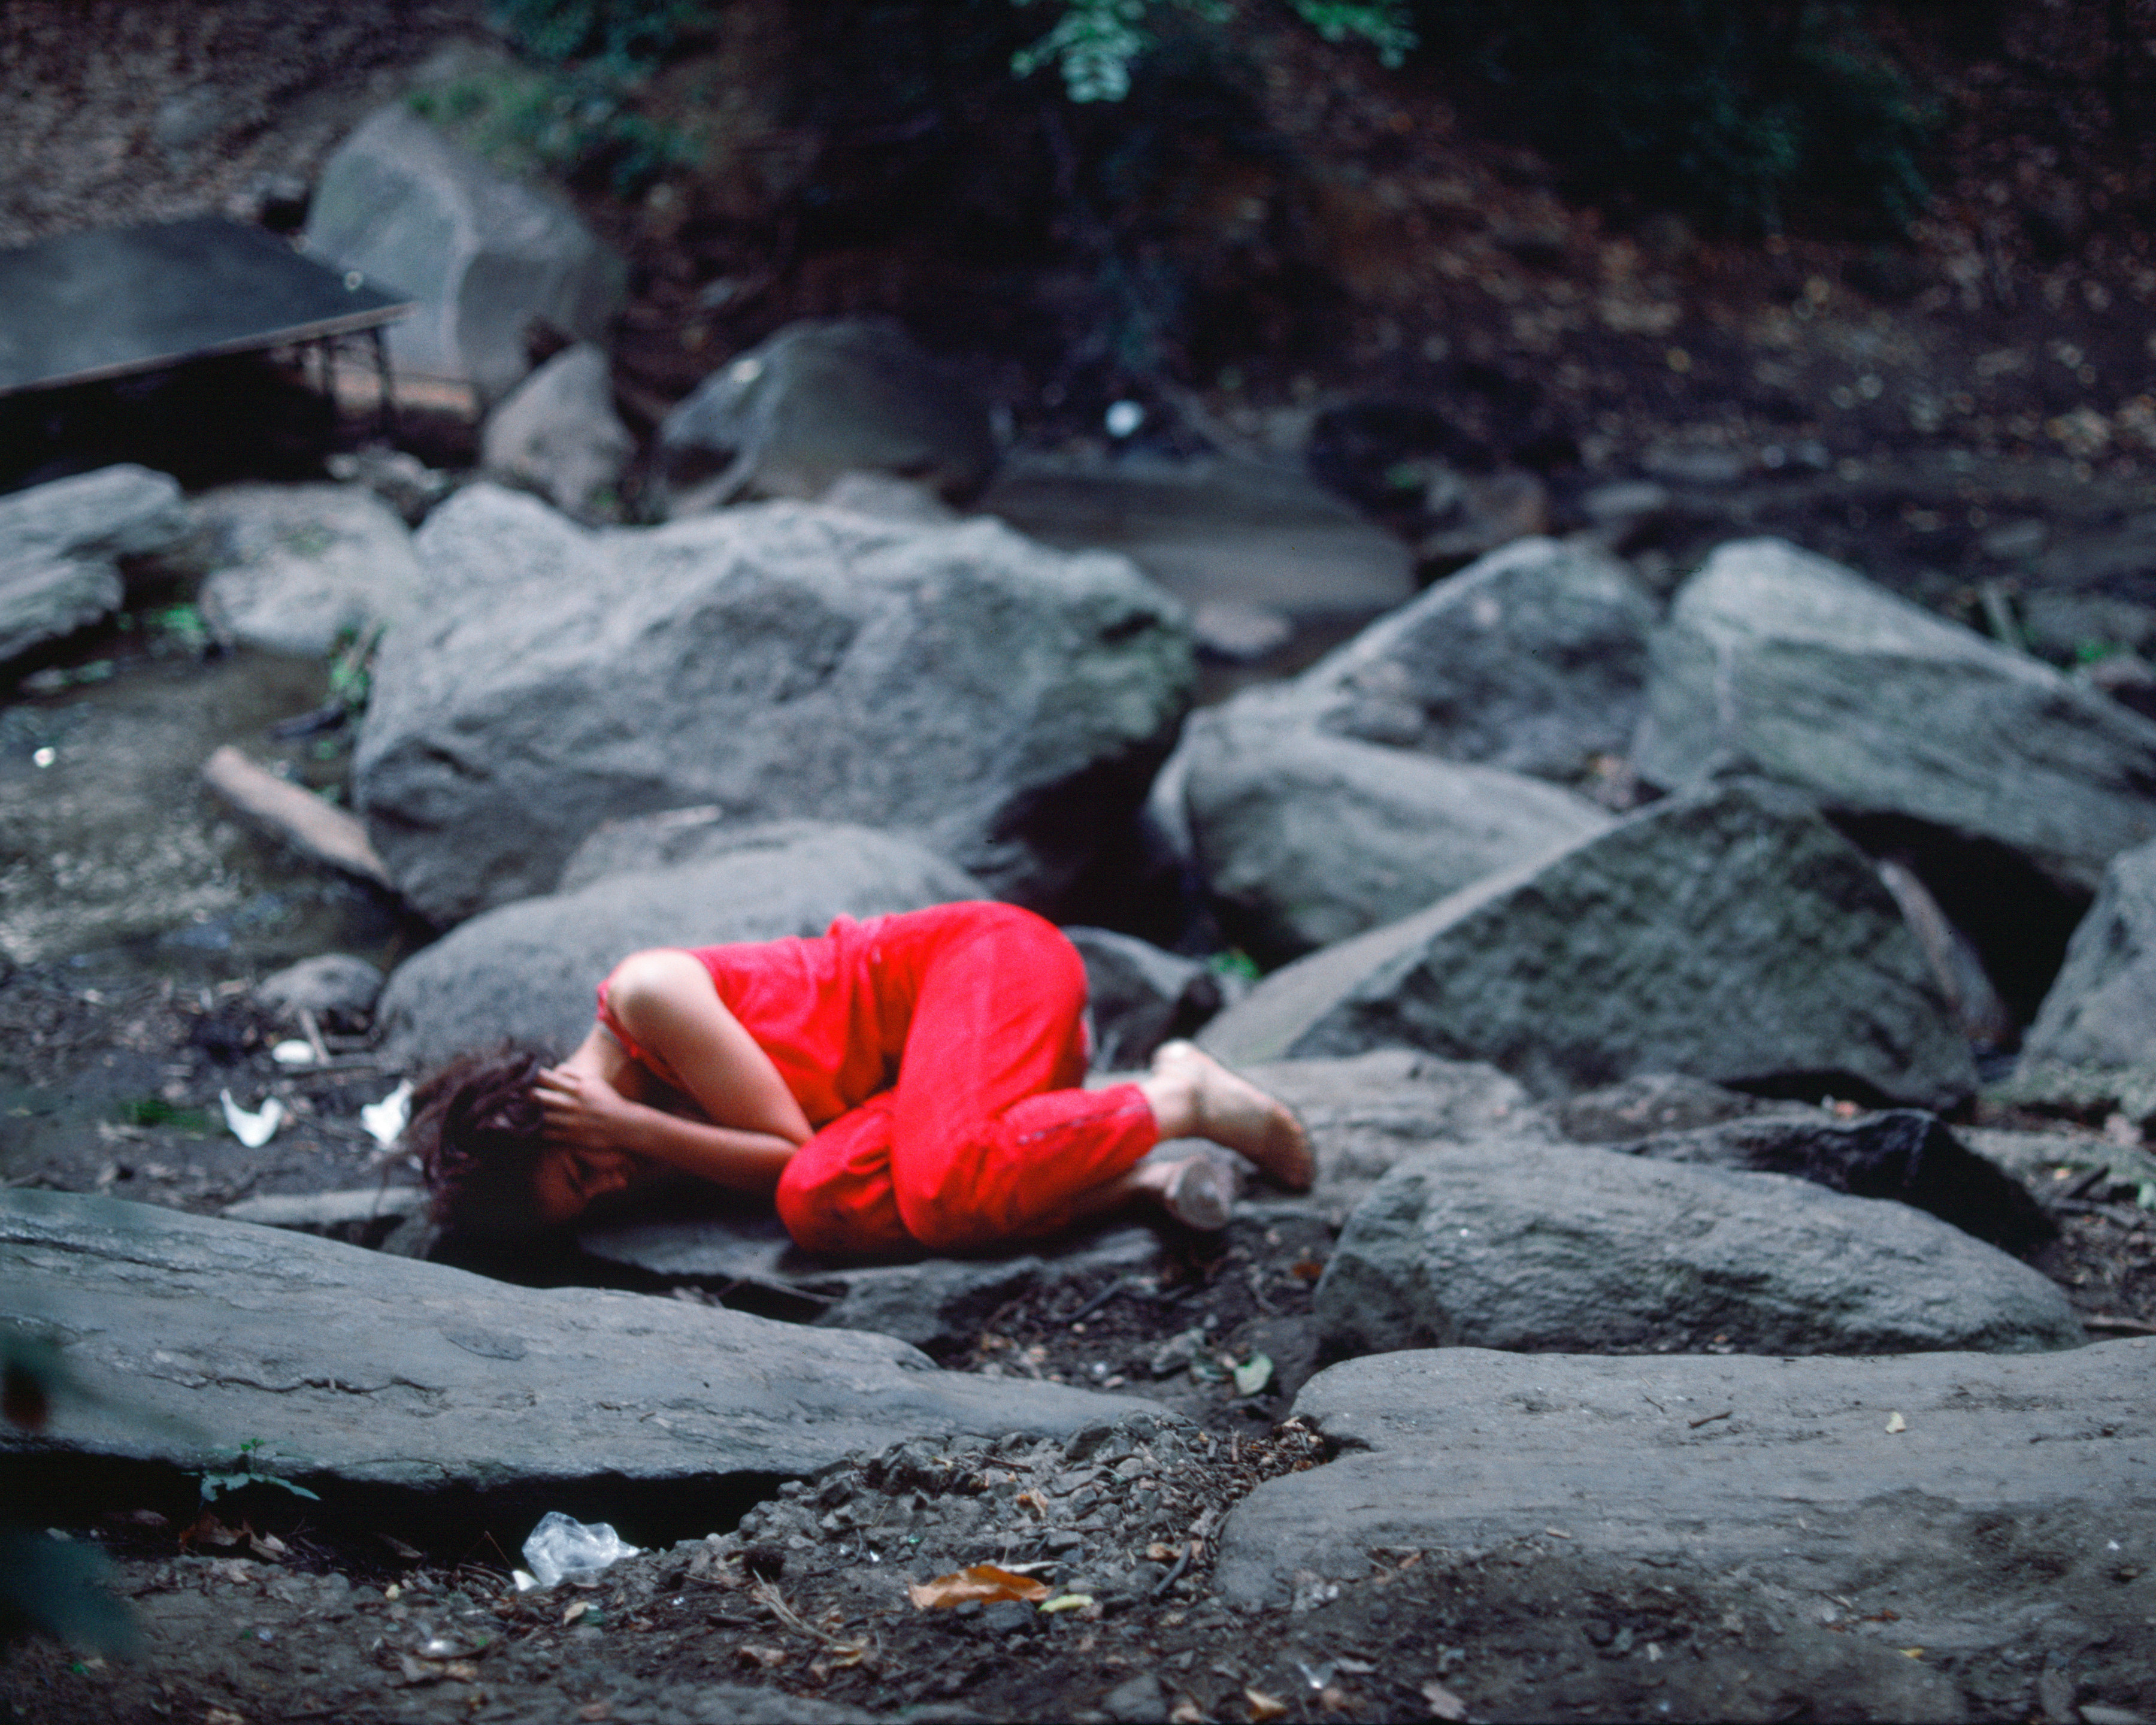 Rivers, First Draft: The Teenager curls up in a fetal position, 1982/2015, Digital C-print from Kodachrome 35mm slides in 48 parts, 16h x 20w in (40.64h x 50.80w cm)